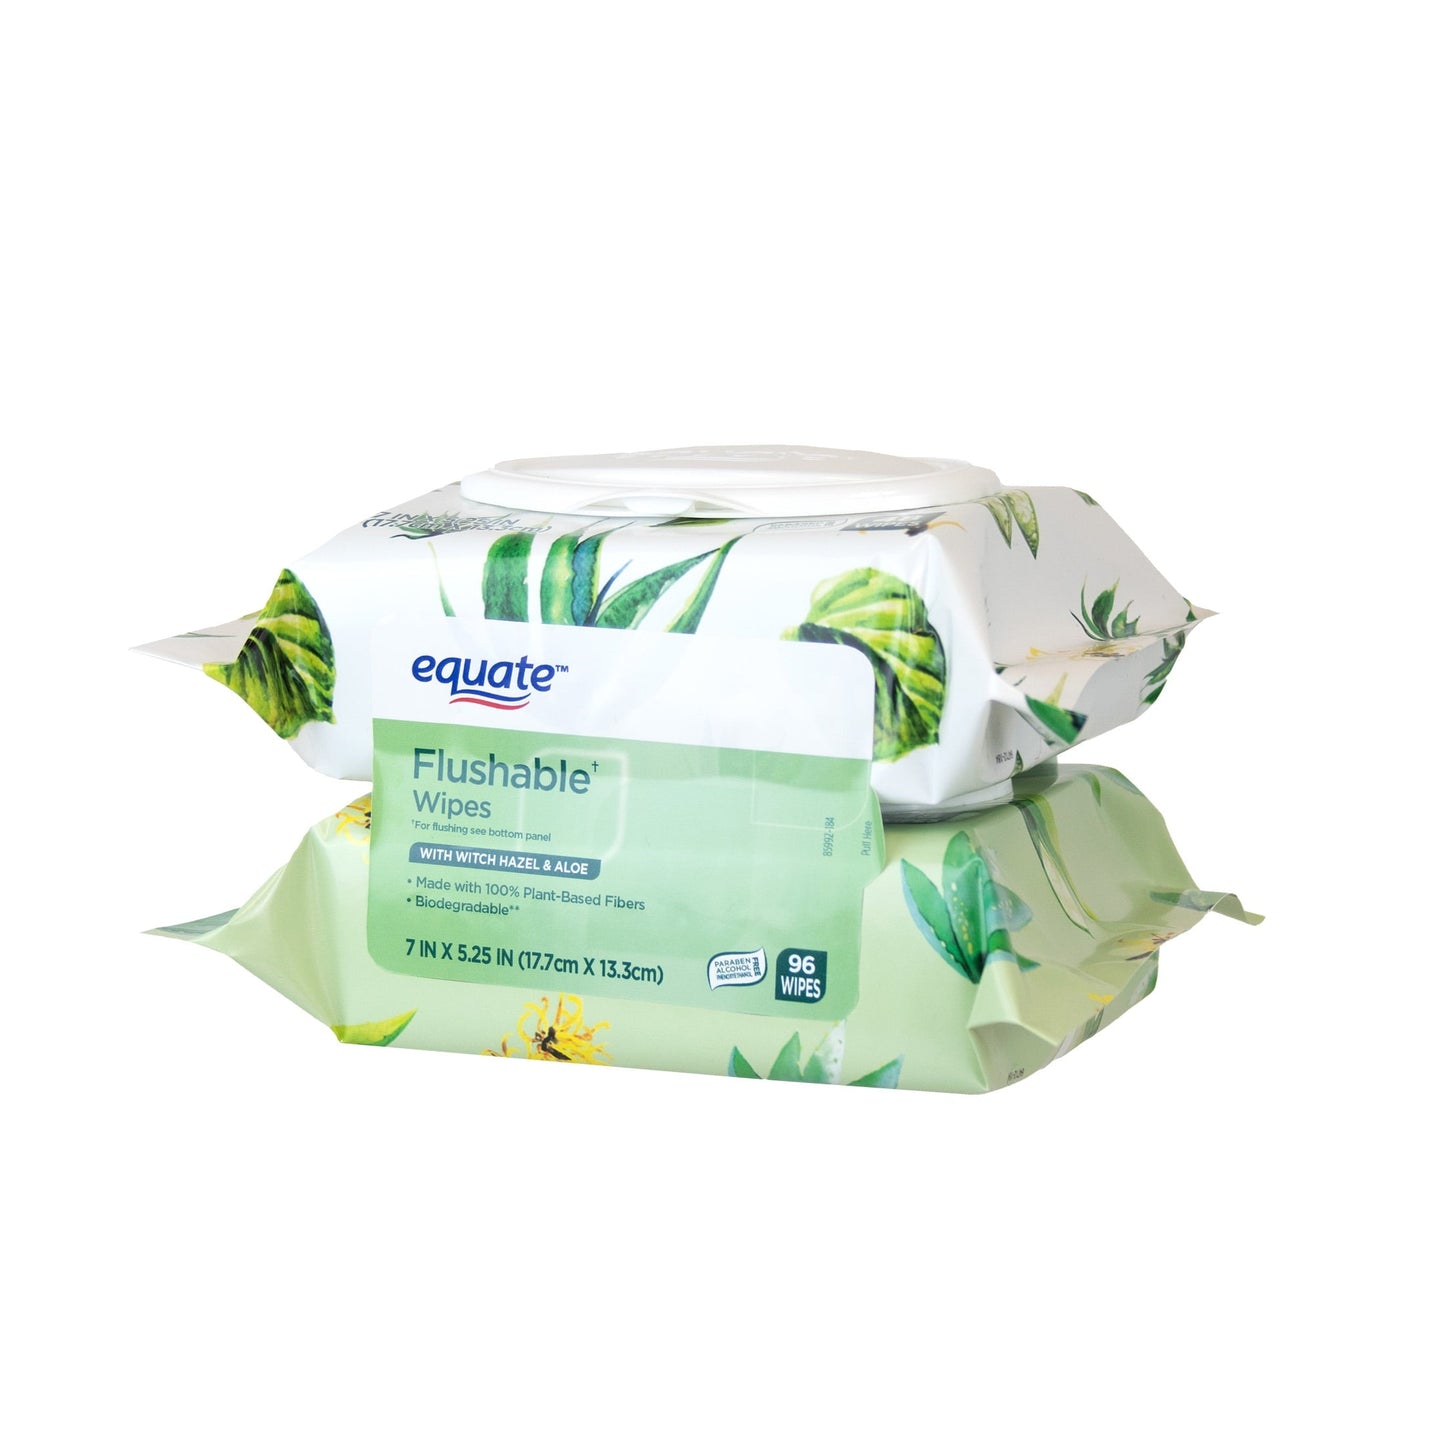 Equate Witch Hazel and Aloe Scent Flushable Wipes, 2 Flip-Top Packs (96 Total Wipes)